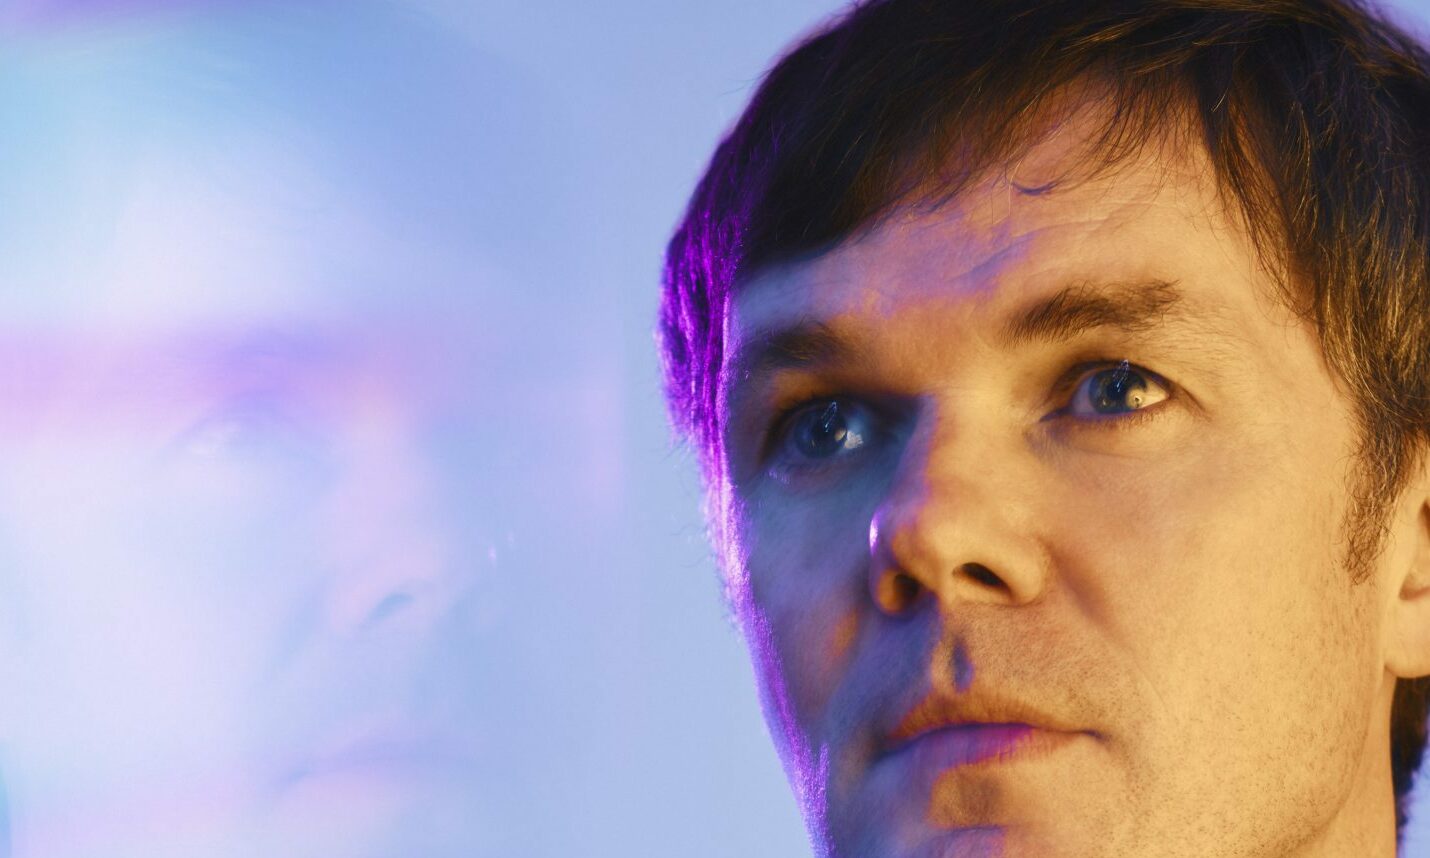 Roddy Woomble is still lead singer for Idlewild, but is currently on a solo tour.